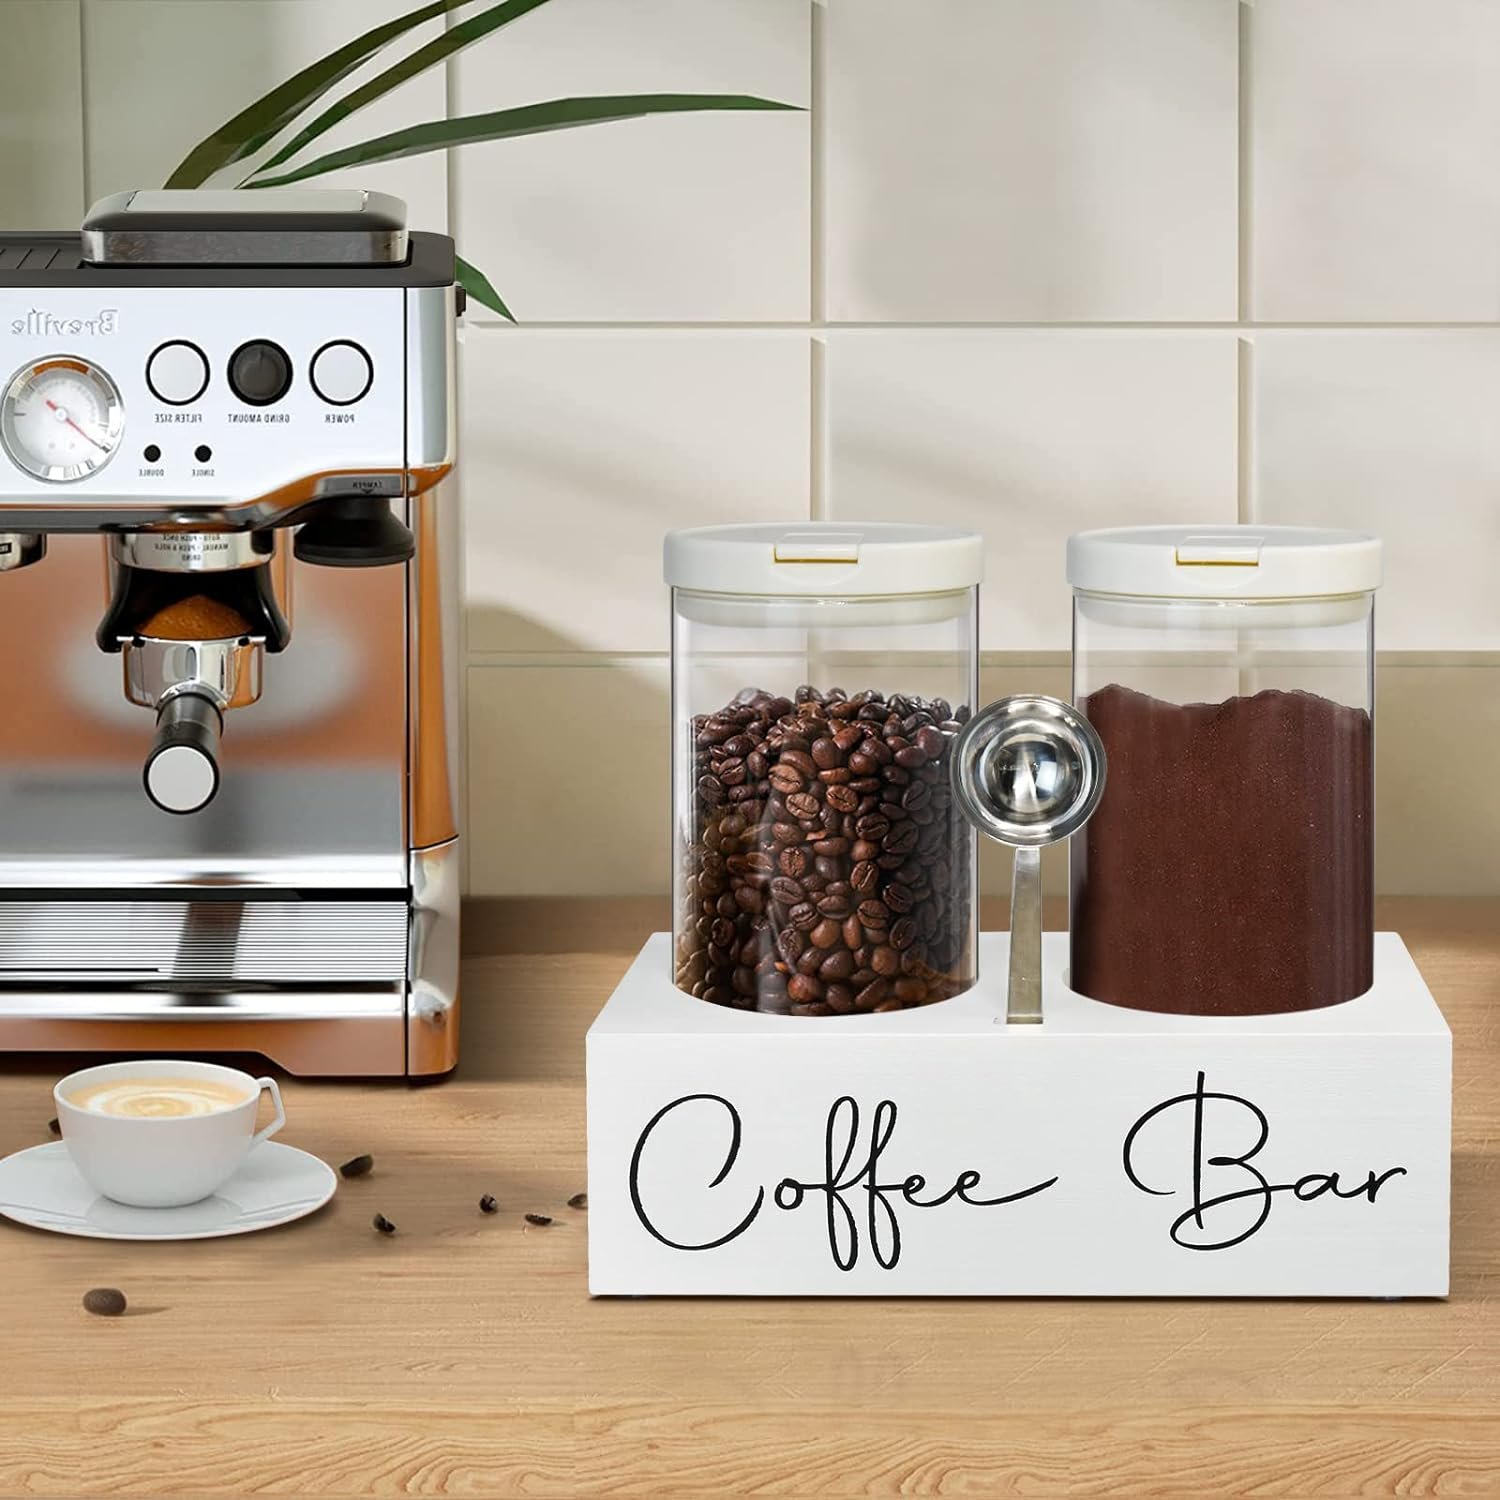 glass coffee containers with shelfcoffee station organizercoffee canister with scoop2x48oz coffee bean storage with airt 3